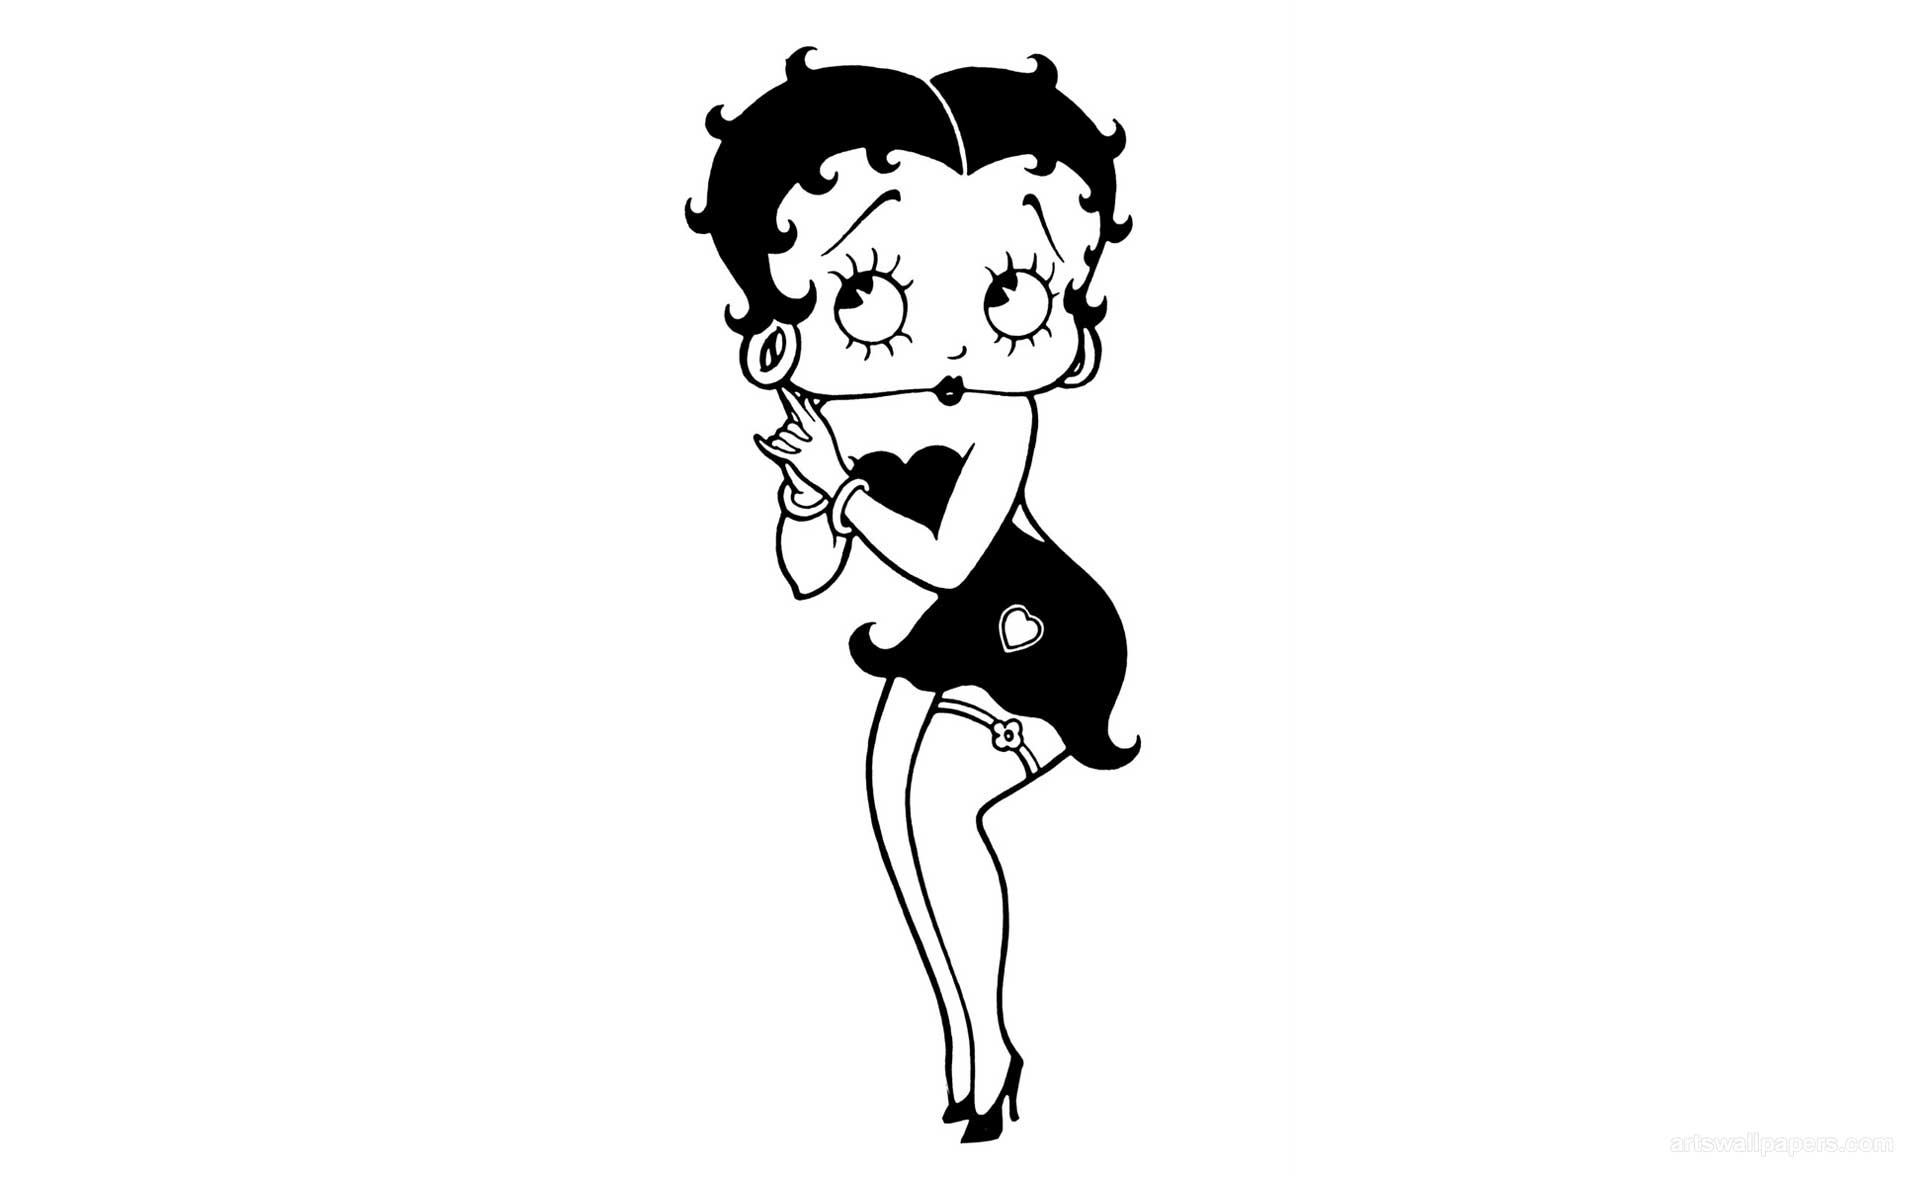 Free Download Betty Boop Wallpapers 02 19x10 For Your Desktop Mobile Tablet Explore 70 Betty Boop Wallpapers Betty Boop Wallpapers Free Download Betty Boop Valentine Wallpaper